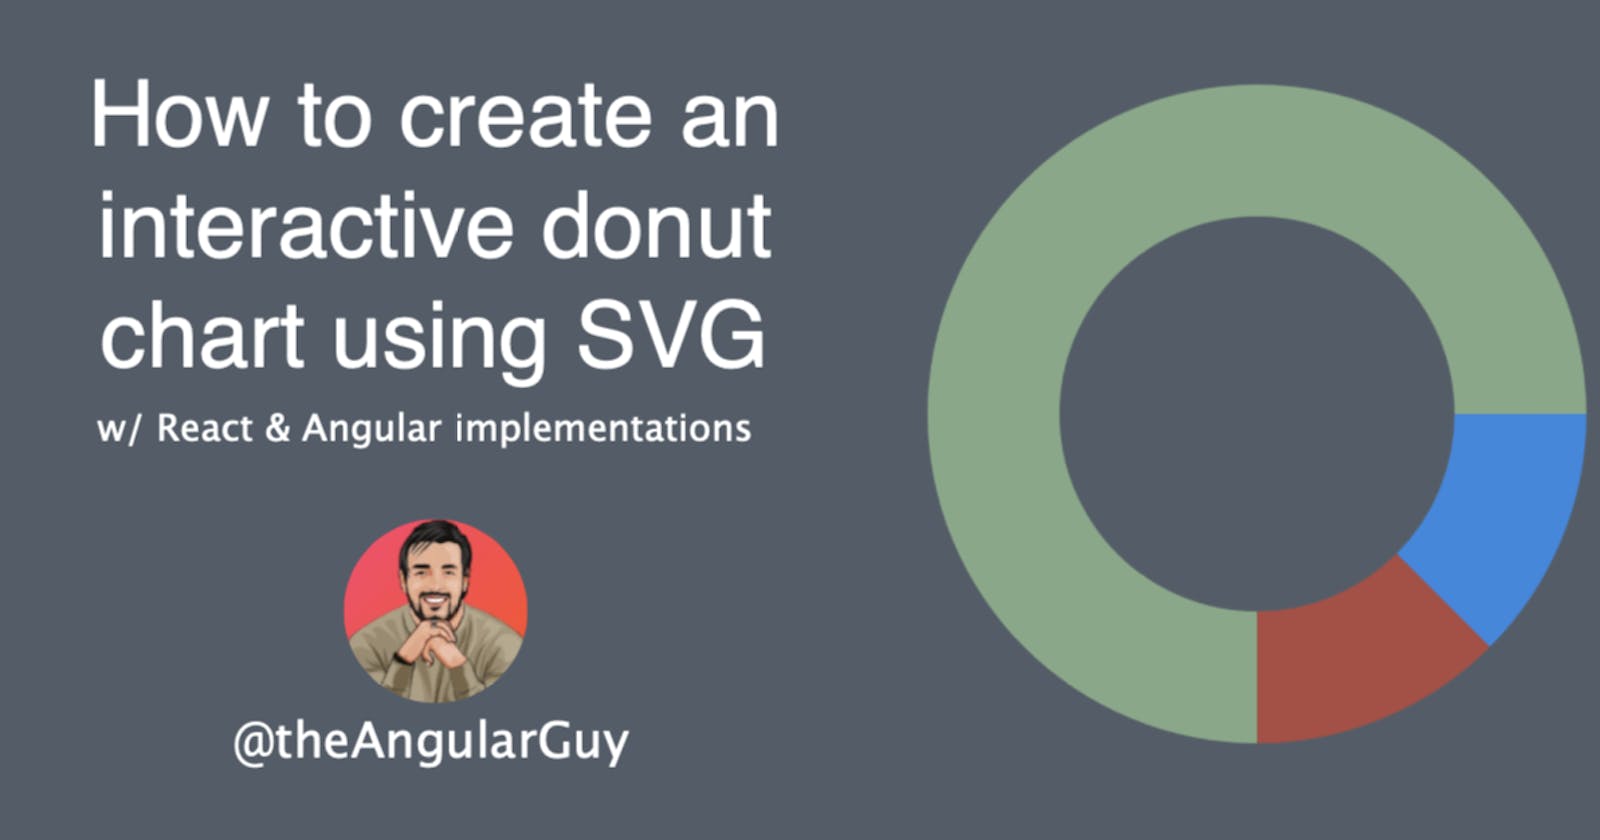 How to create an interactive donut chart using SVG